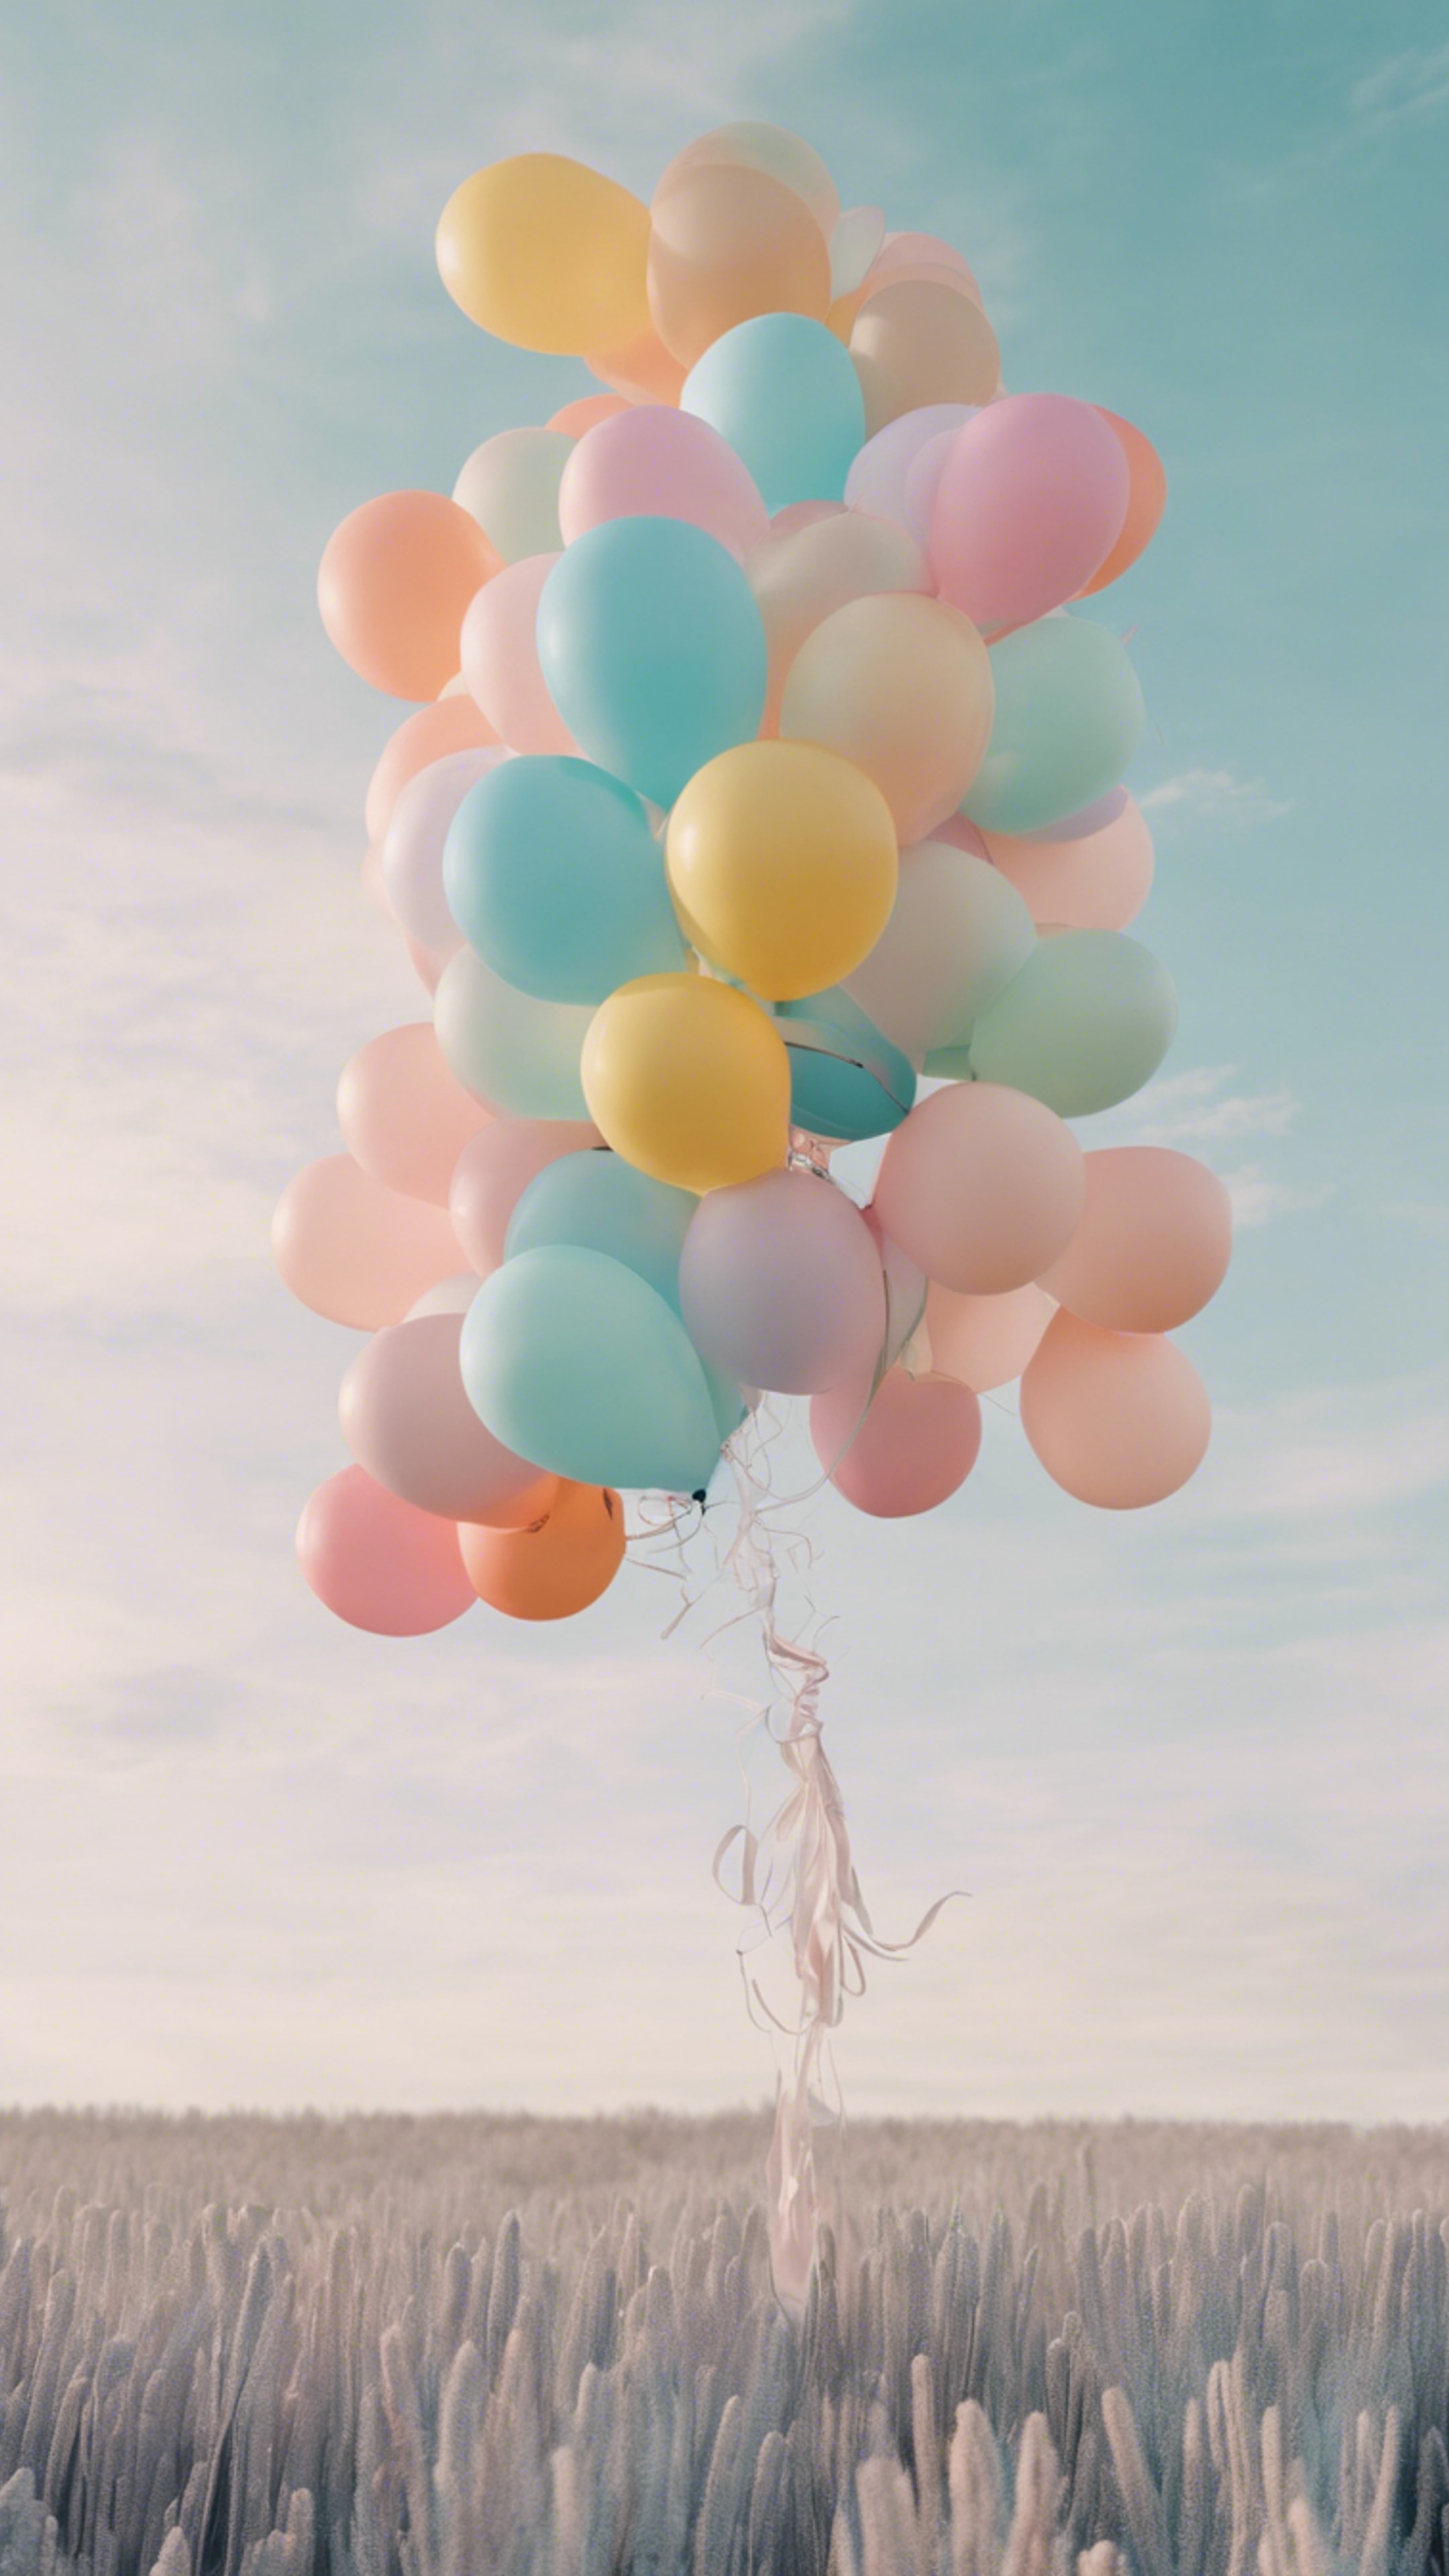 A cool pastel colored cluster of balloons floating in a clear sky. duvar kağıdı[294975c578db48368ab8]